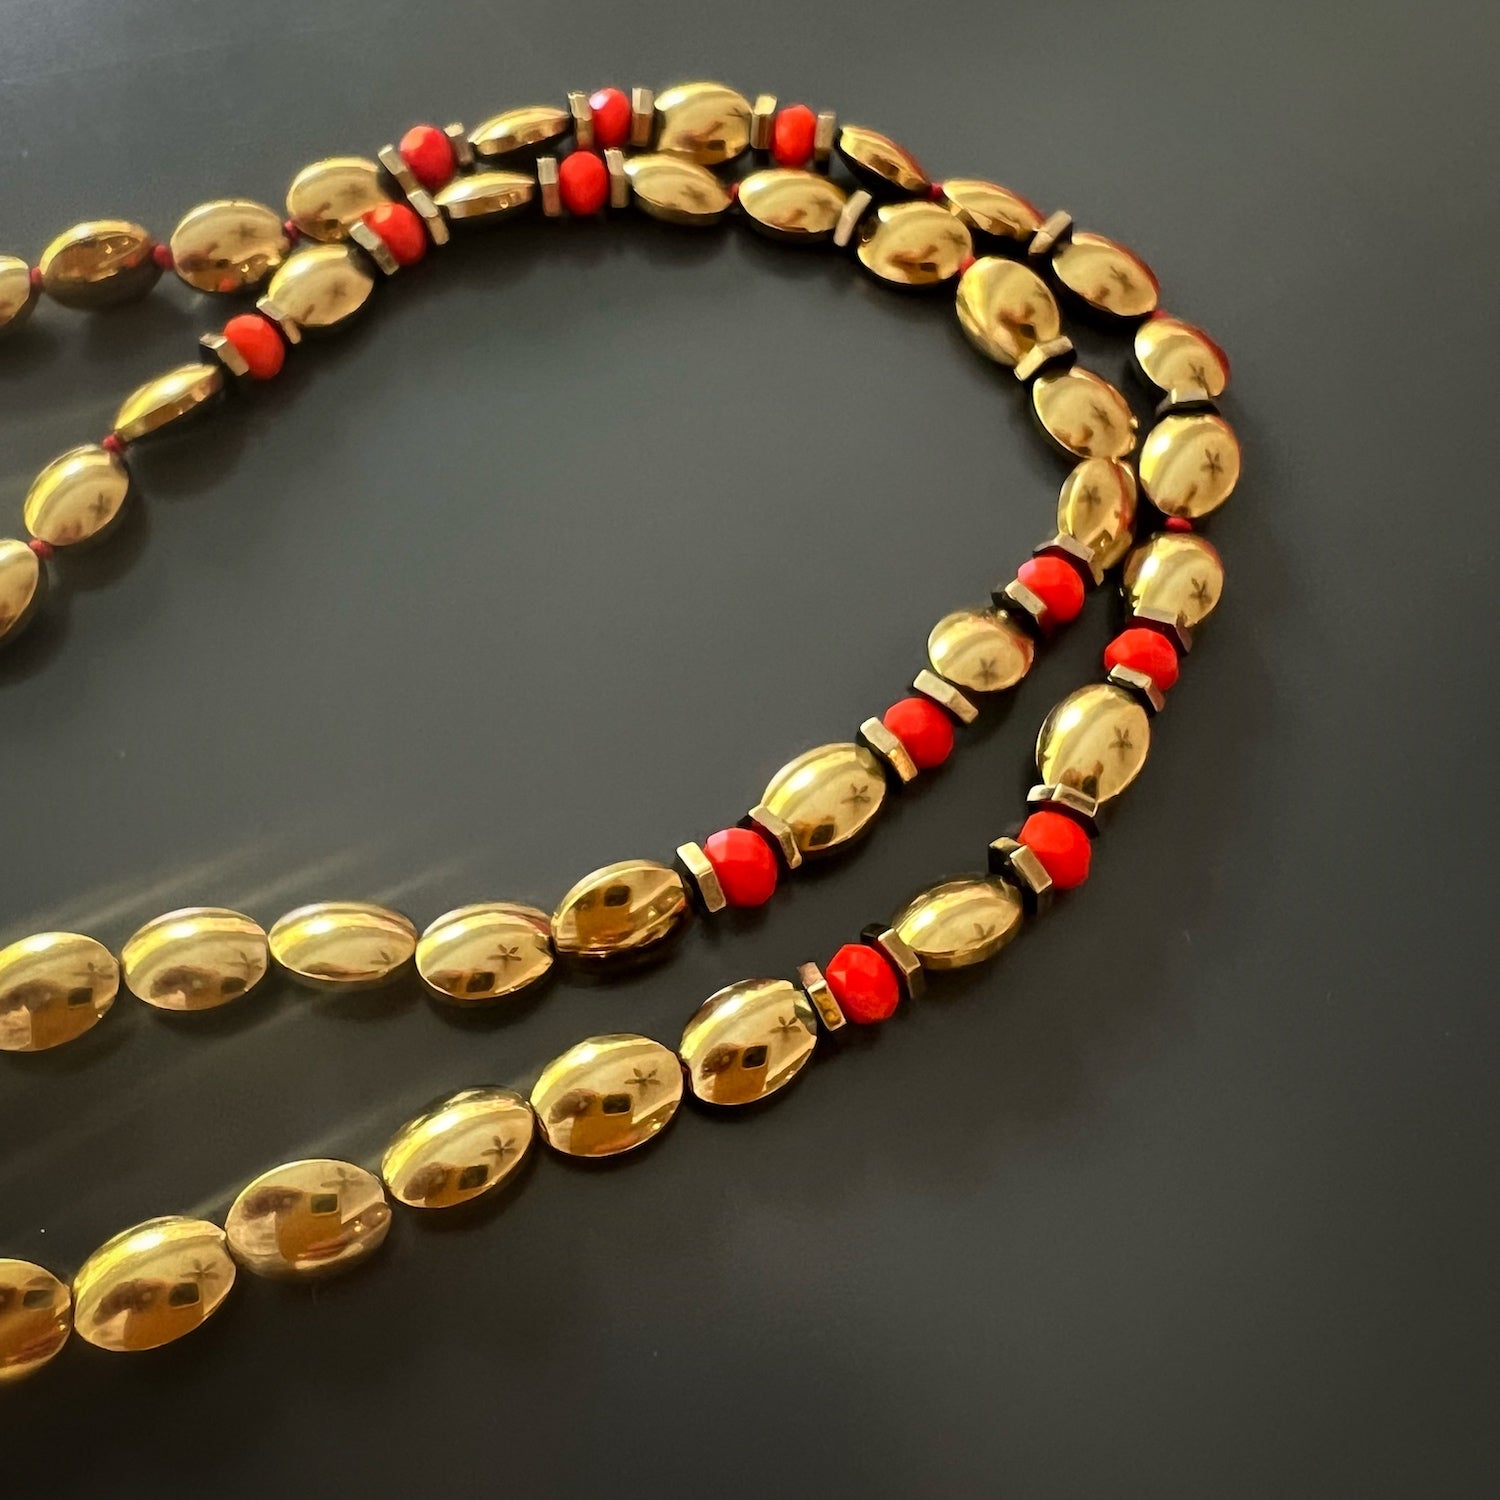 The golden hues of the hematite stone beads on the Powerful Protection Talisman Necklace